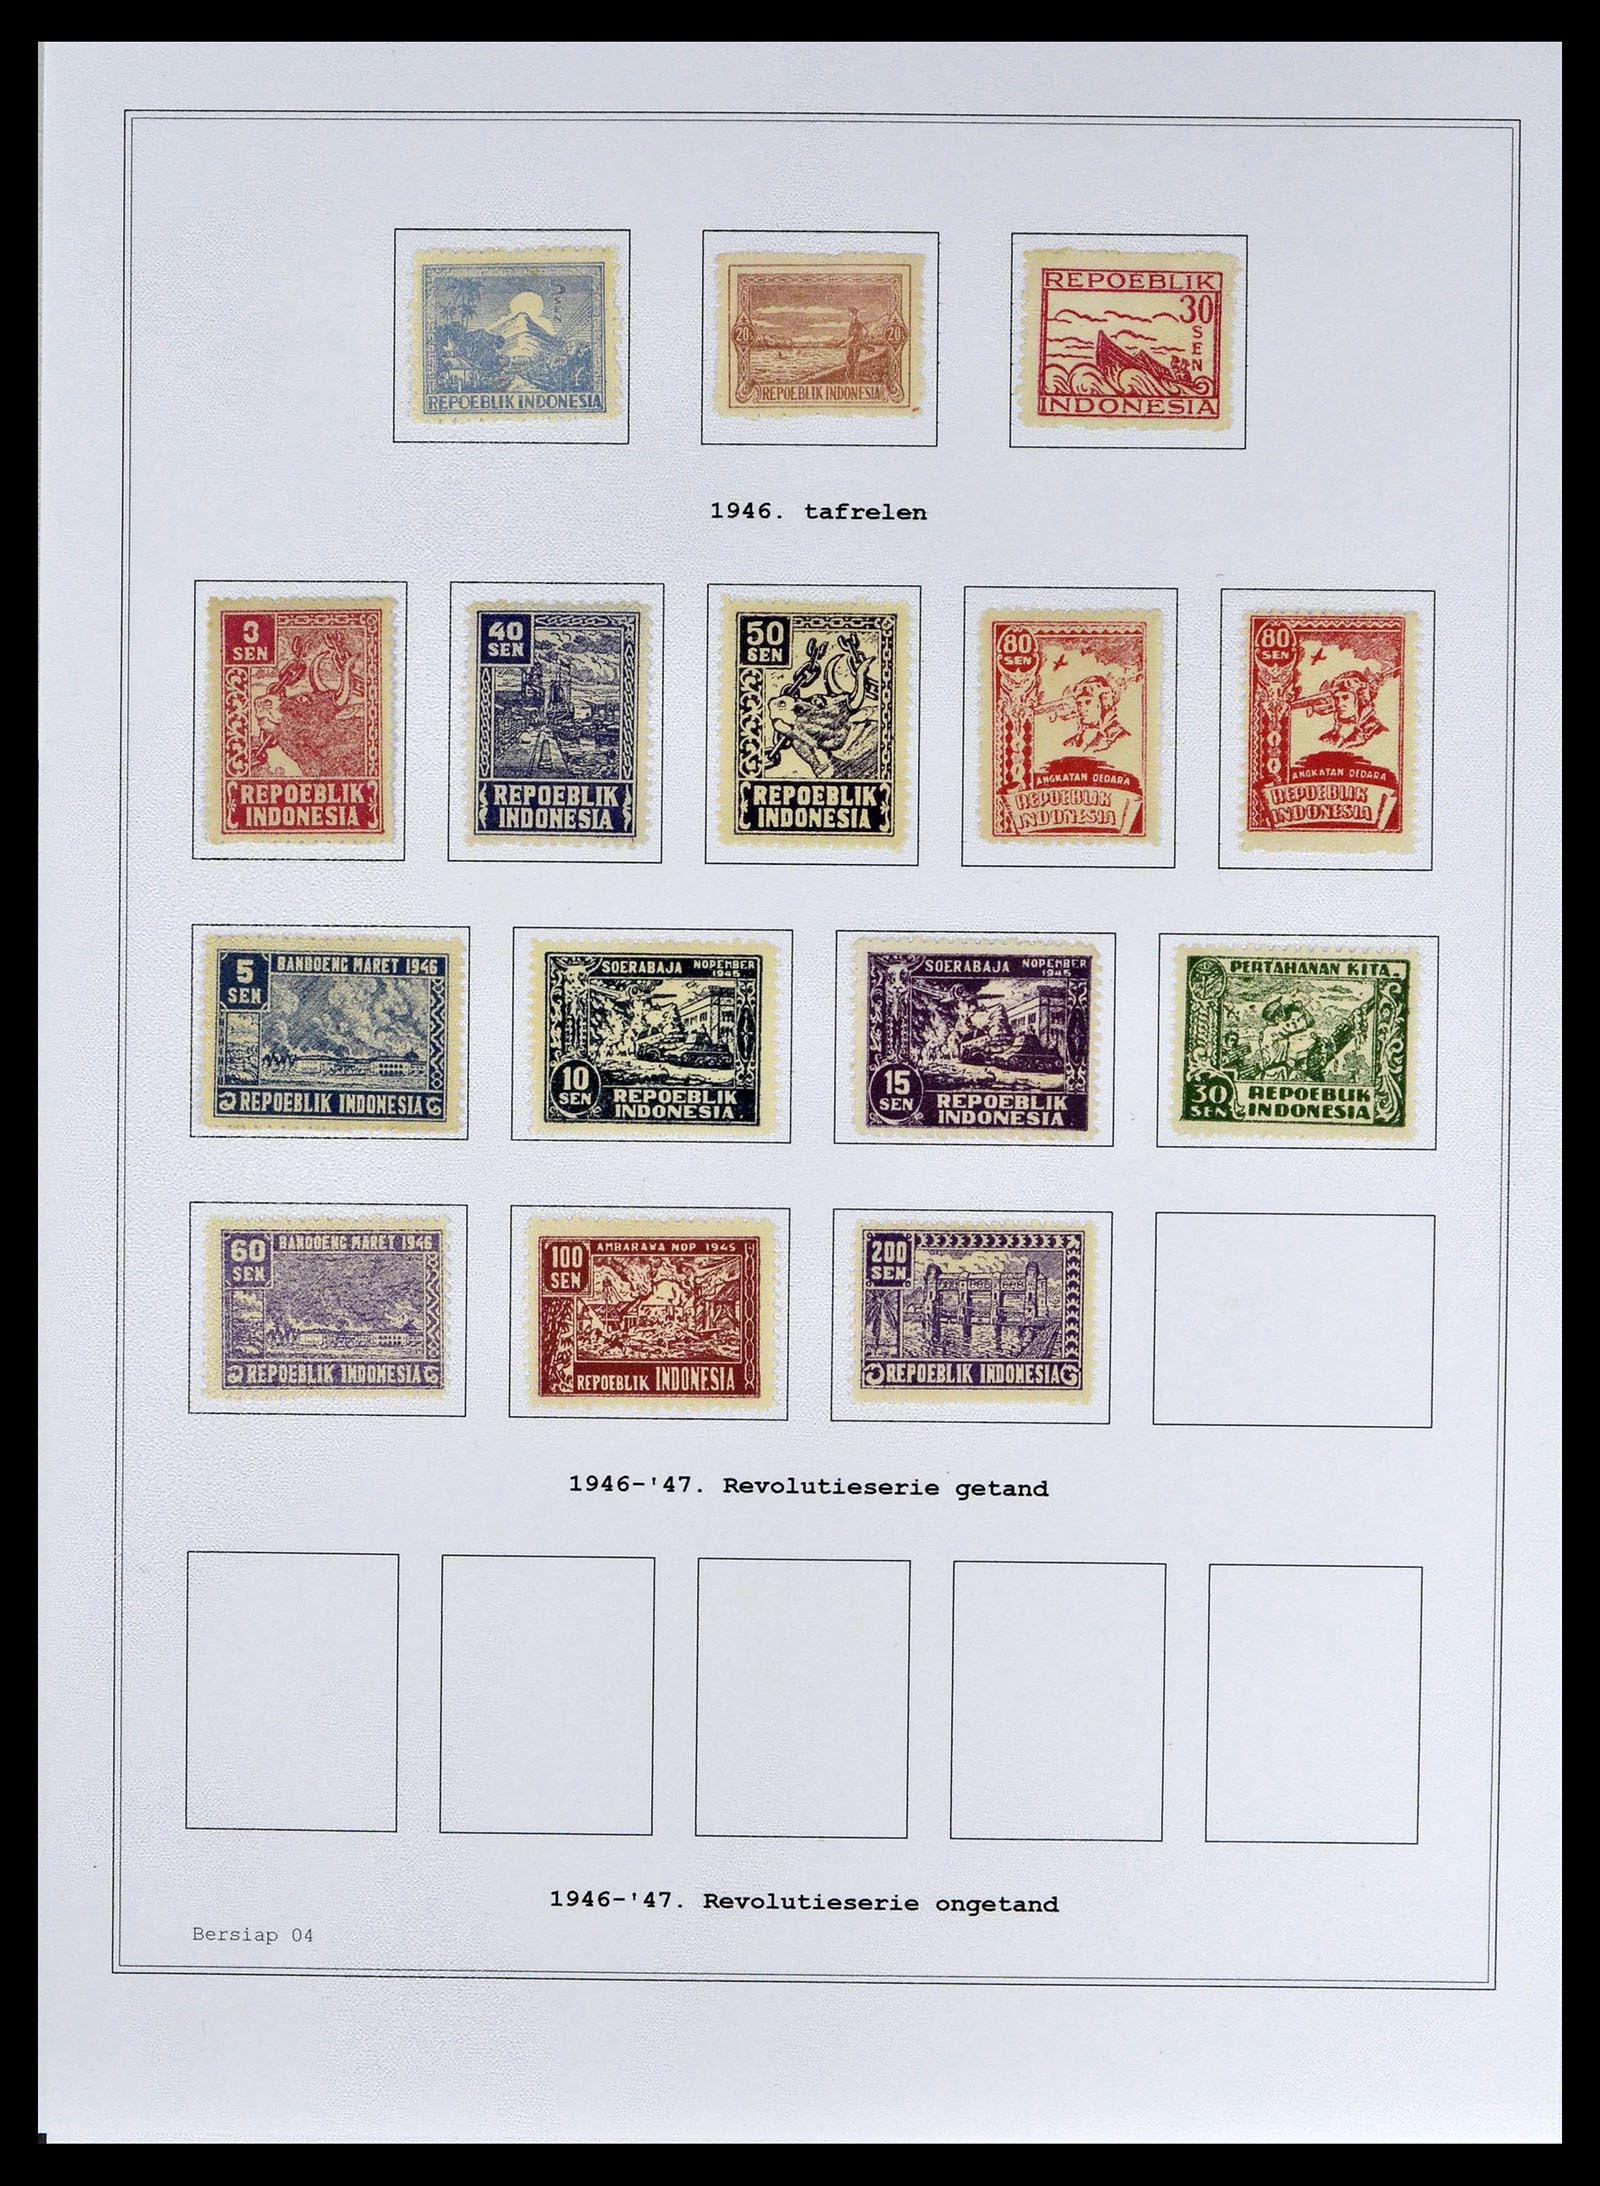 39026 0086 - Stamp collection 39026 Dutch east Indies and Suriname 1864-1975.